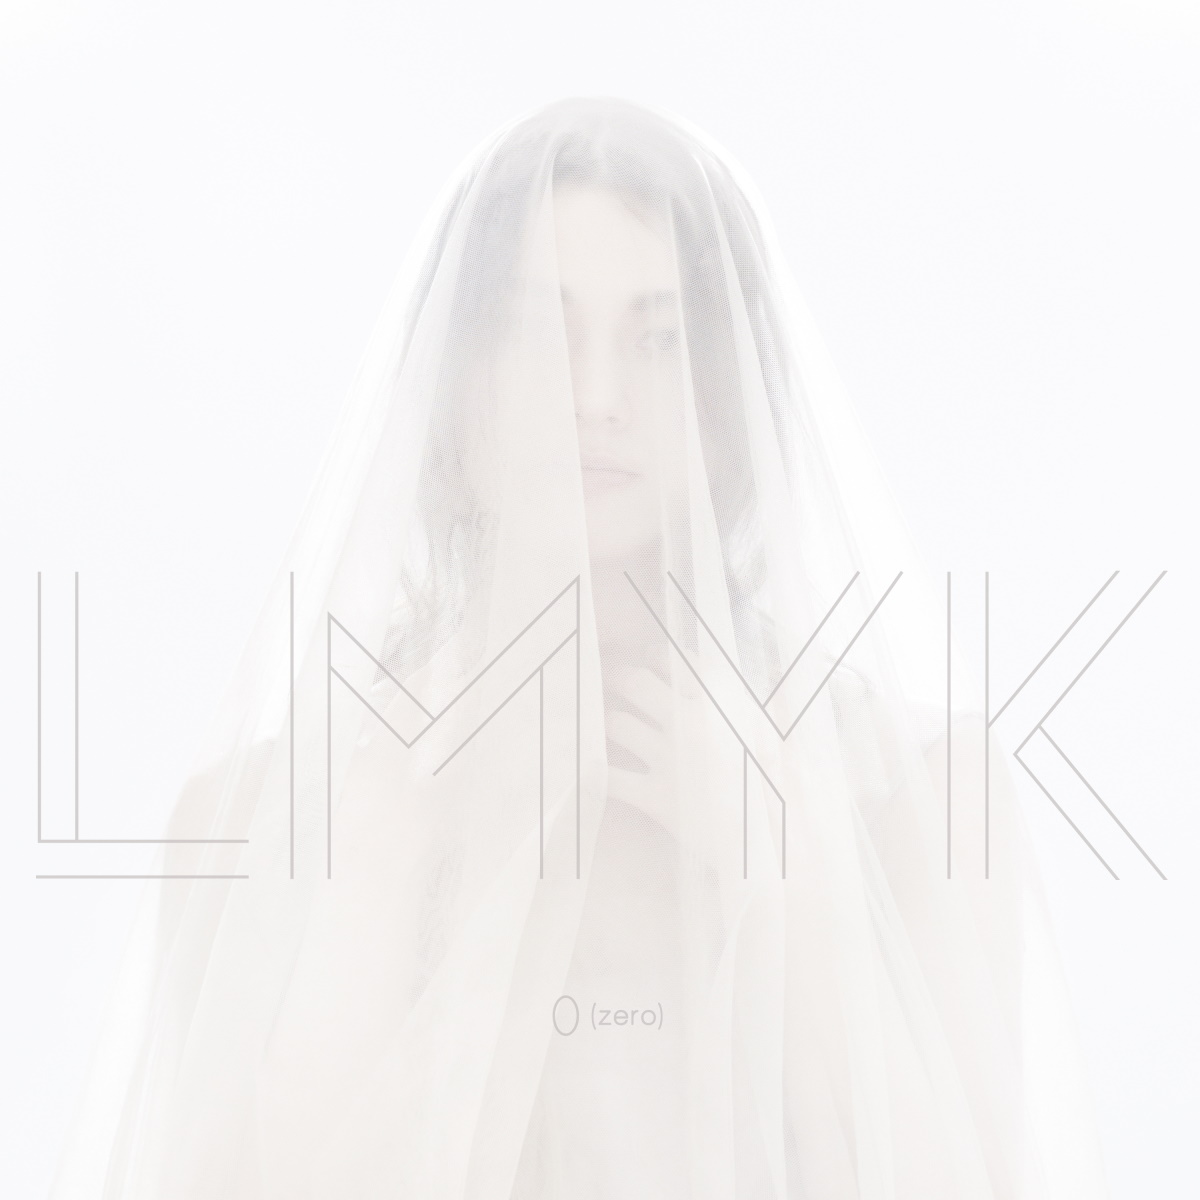 Cover art for『LMYK - 0 (zero)』from the release『0(zero)』